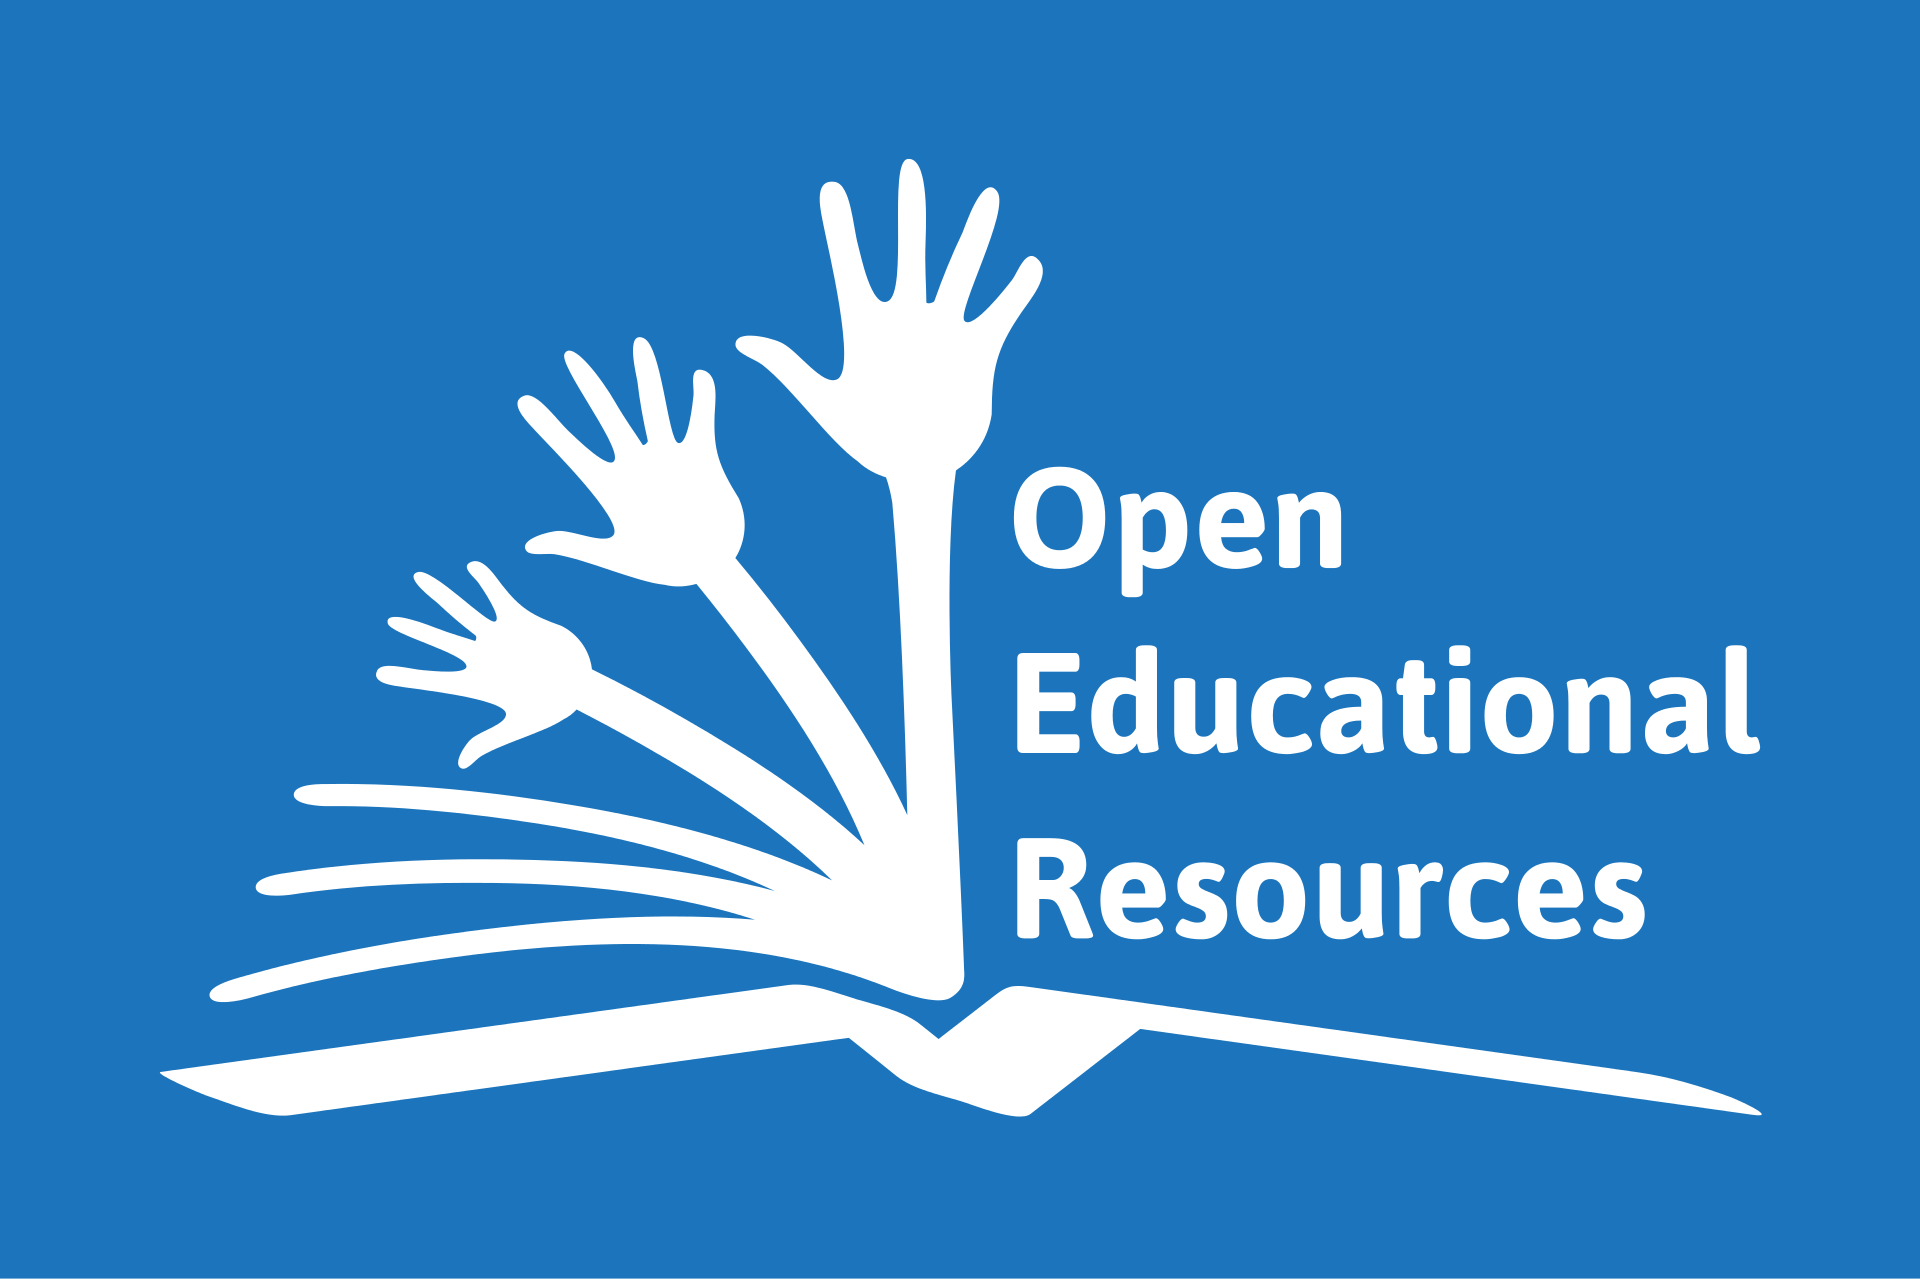 Open Educational Resources Logo, shows white hands extending from a book